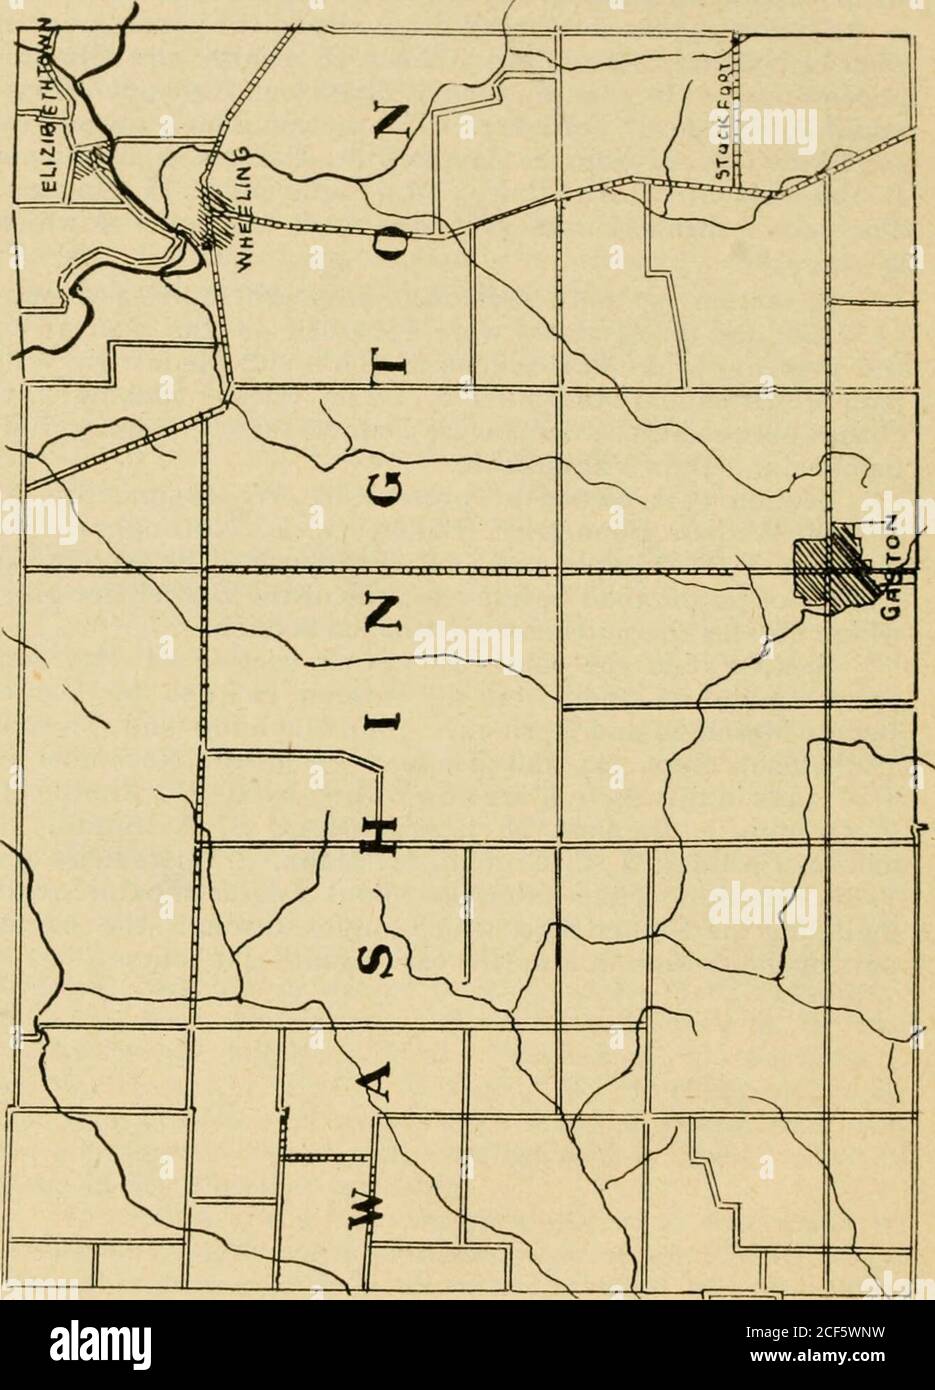 . Our county; its history and early settlement by townships. h 8 and the last by Wil-liam H. Brumfield November 8. The parties making pur-chases between those dates were Daniel Jarrett, James Wil-liamson and John Vanbuskirk. Section 35 is owned at present by W. Stephenson, J.Brown, William Bennett, E. Baker, G. L. Nottingham, D.P. Root, T. H. Fimple and S. B. Bradbury. The section has2 miles of public road beside one mile of the Bethel free pike,which crosses the northeast part of the section. Section 36 is the southeast corner section of Harrisontownship and its lands were all entered in 1836 Stock Photo